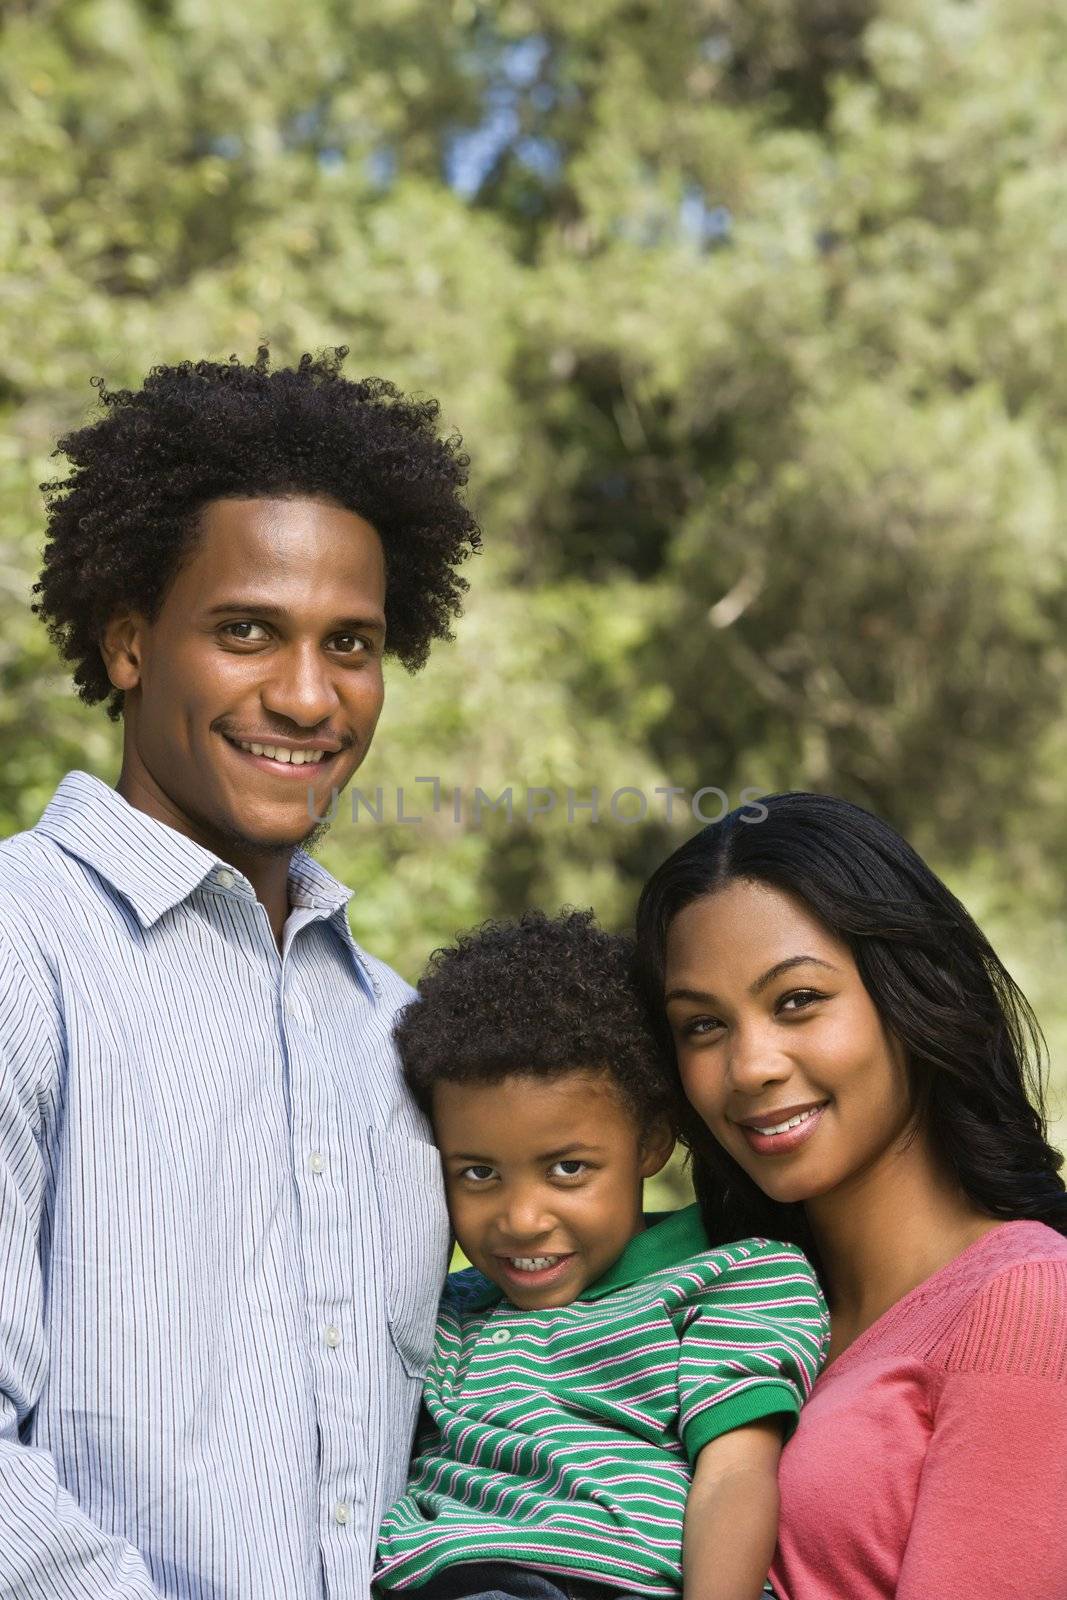 Family portrait of parents and young son smiling.